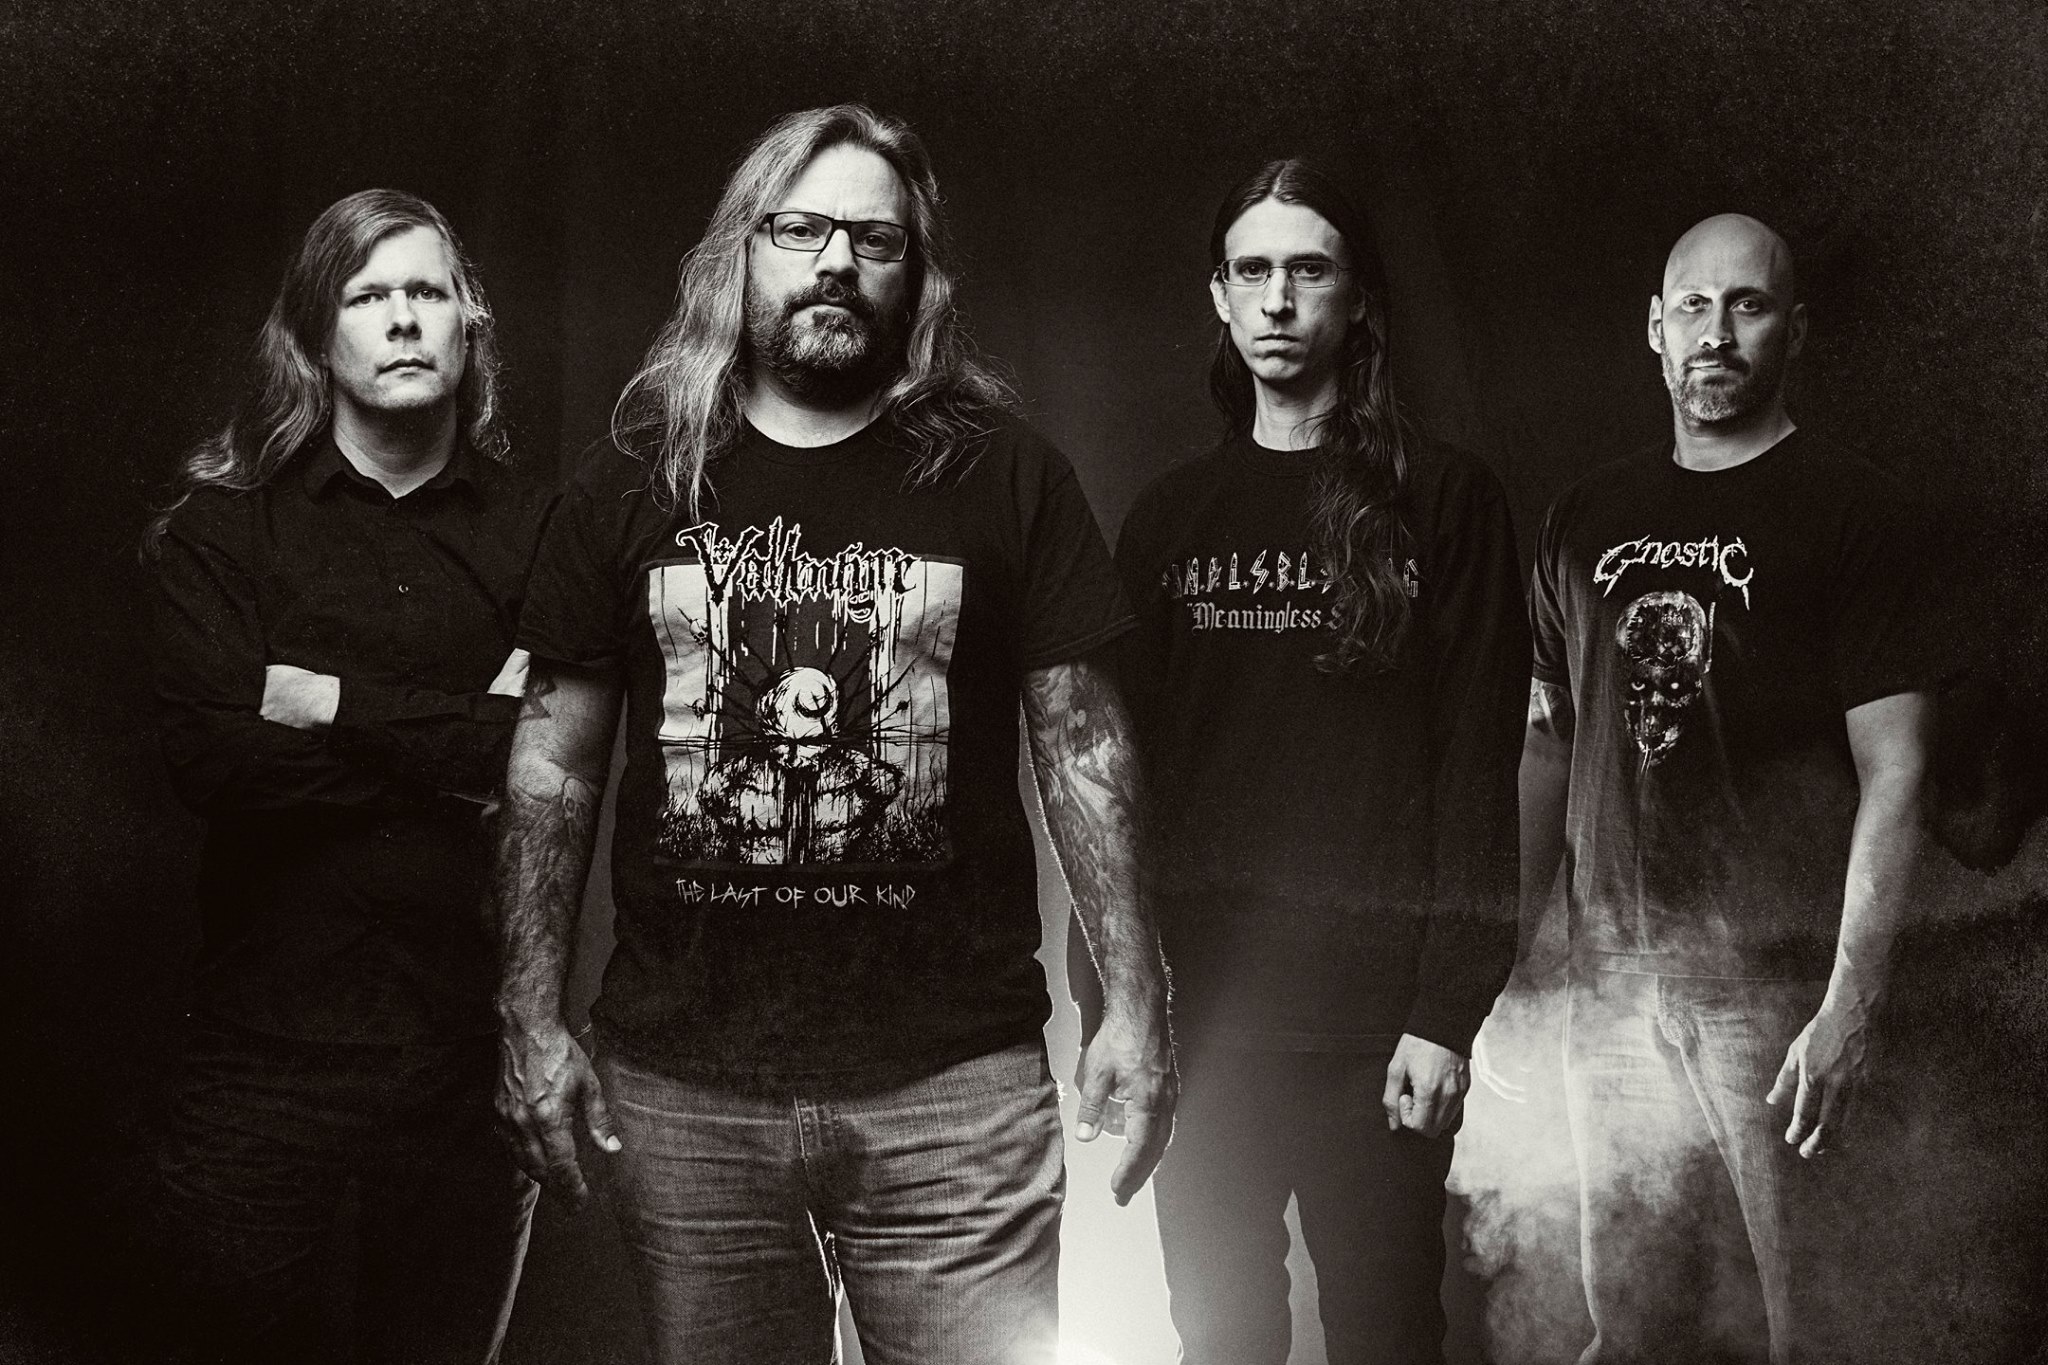 Formed in Sherbrooke, QC, Gorguts are one of technical death metal’s most boldly original voices, their 1998 album Obscura defying conventions. Photo by Jimmy Hubbard.